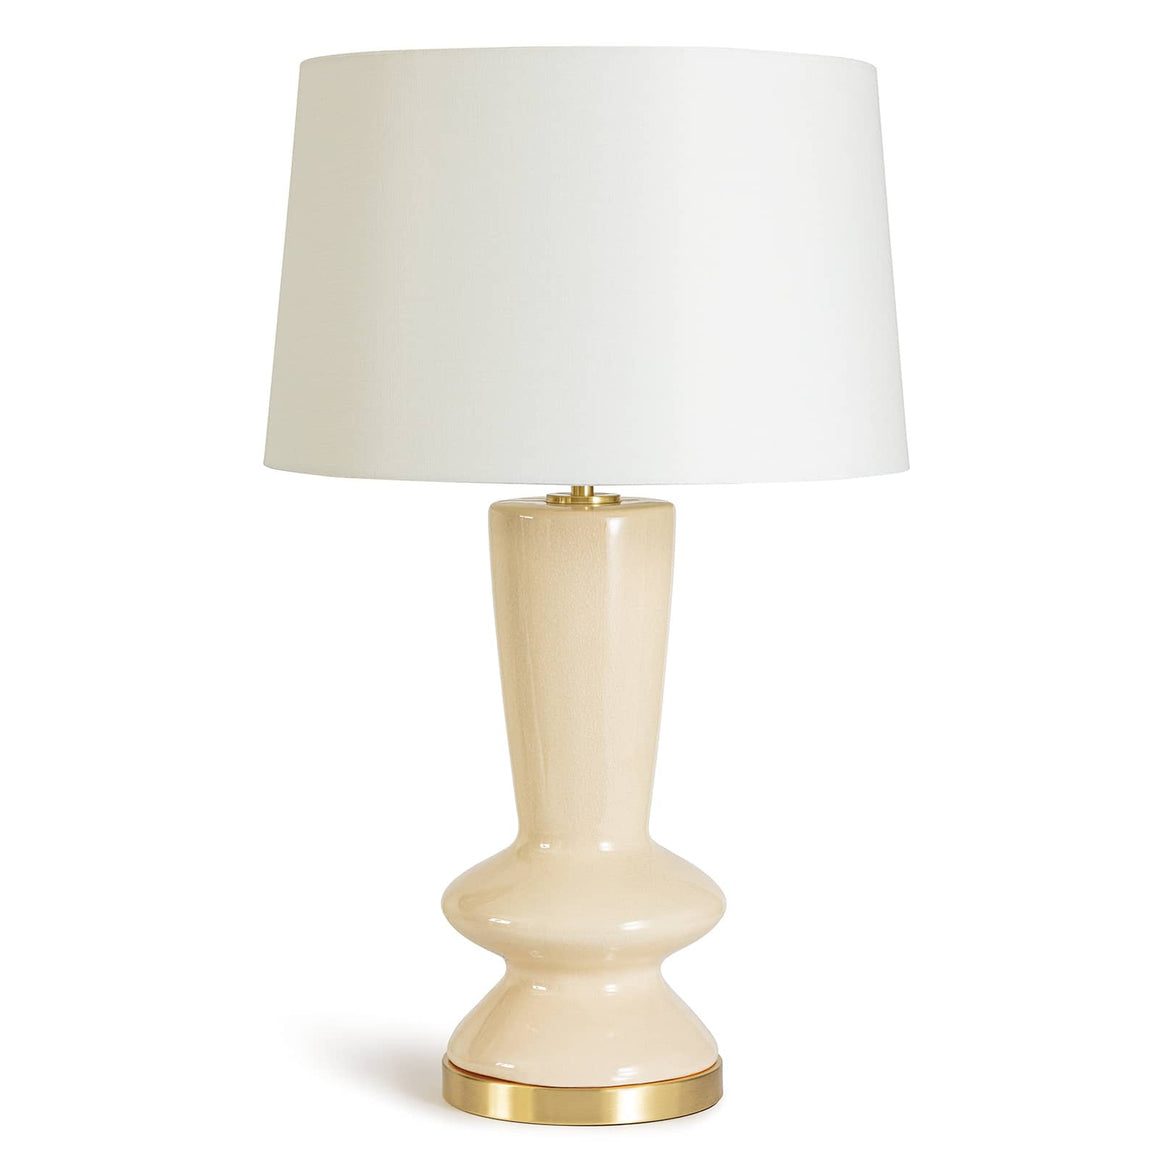 Southern Living Pennie Ceramic Table Lamp